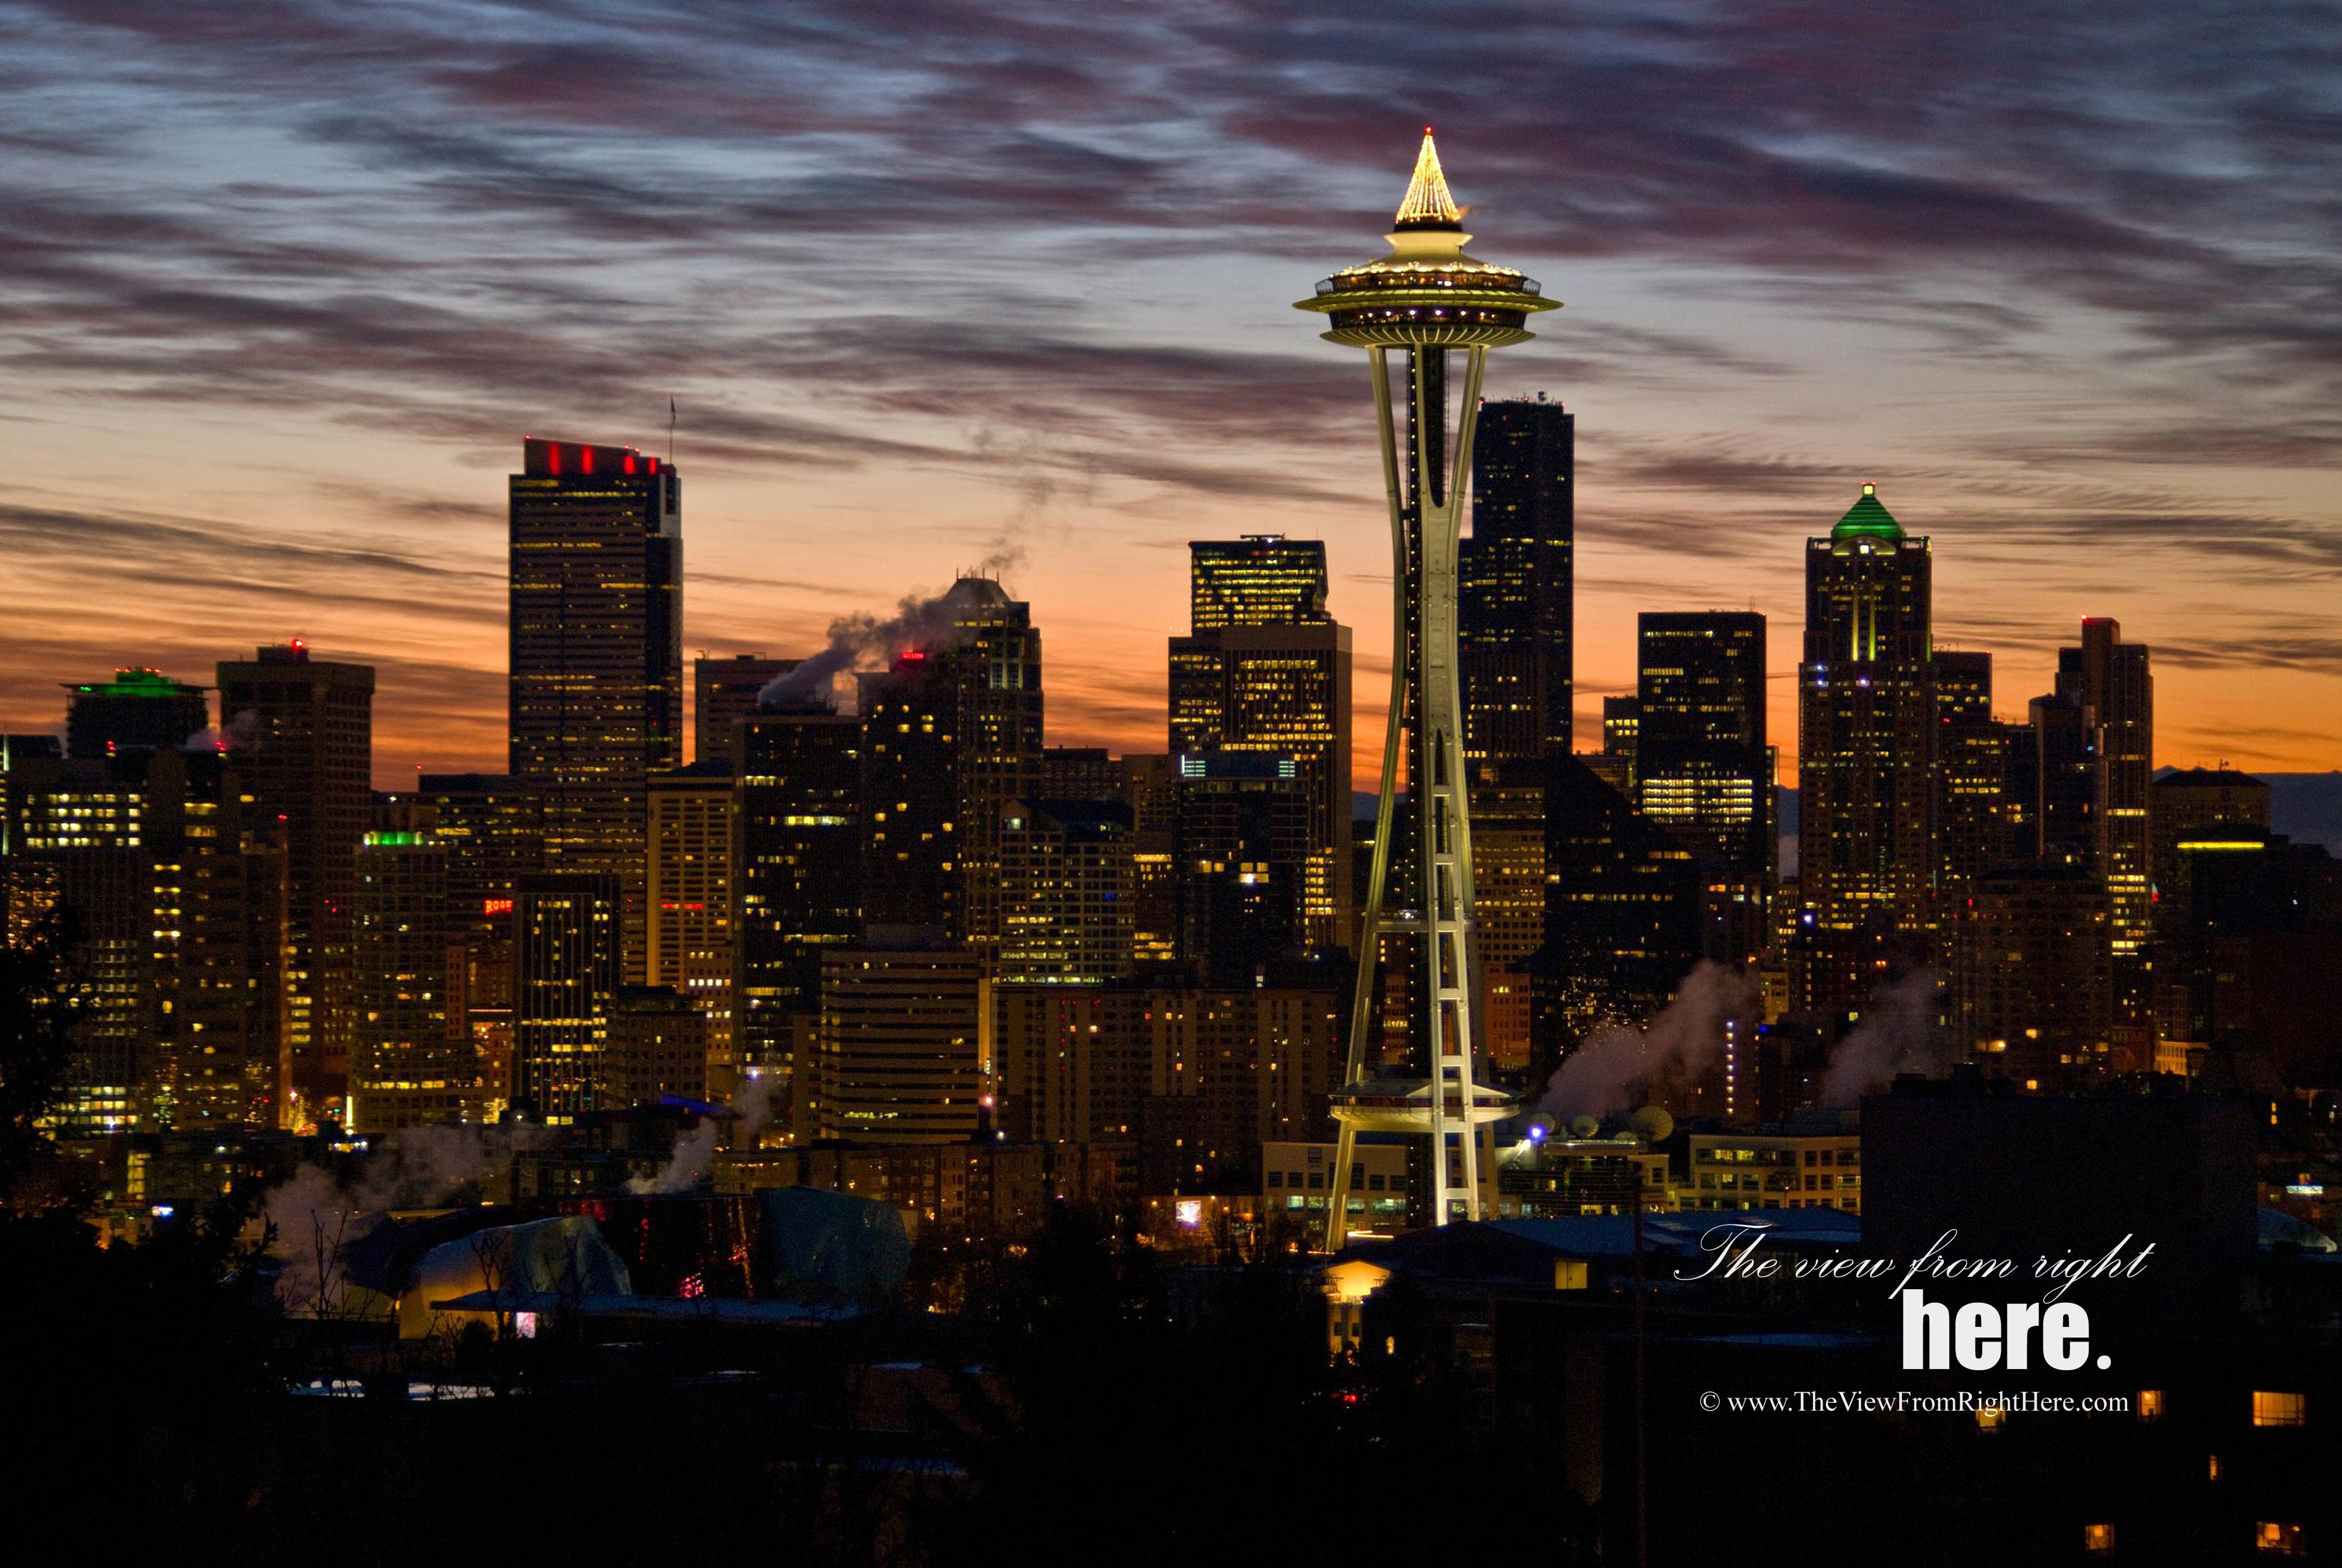 Christmas at the Space Needle – Weekly Top Shot #6